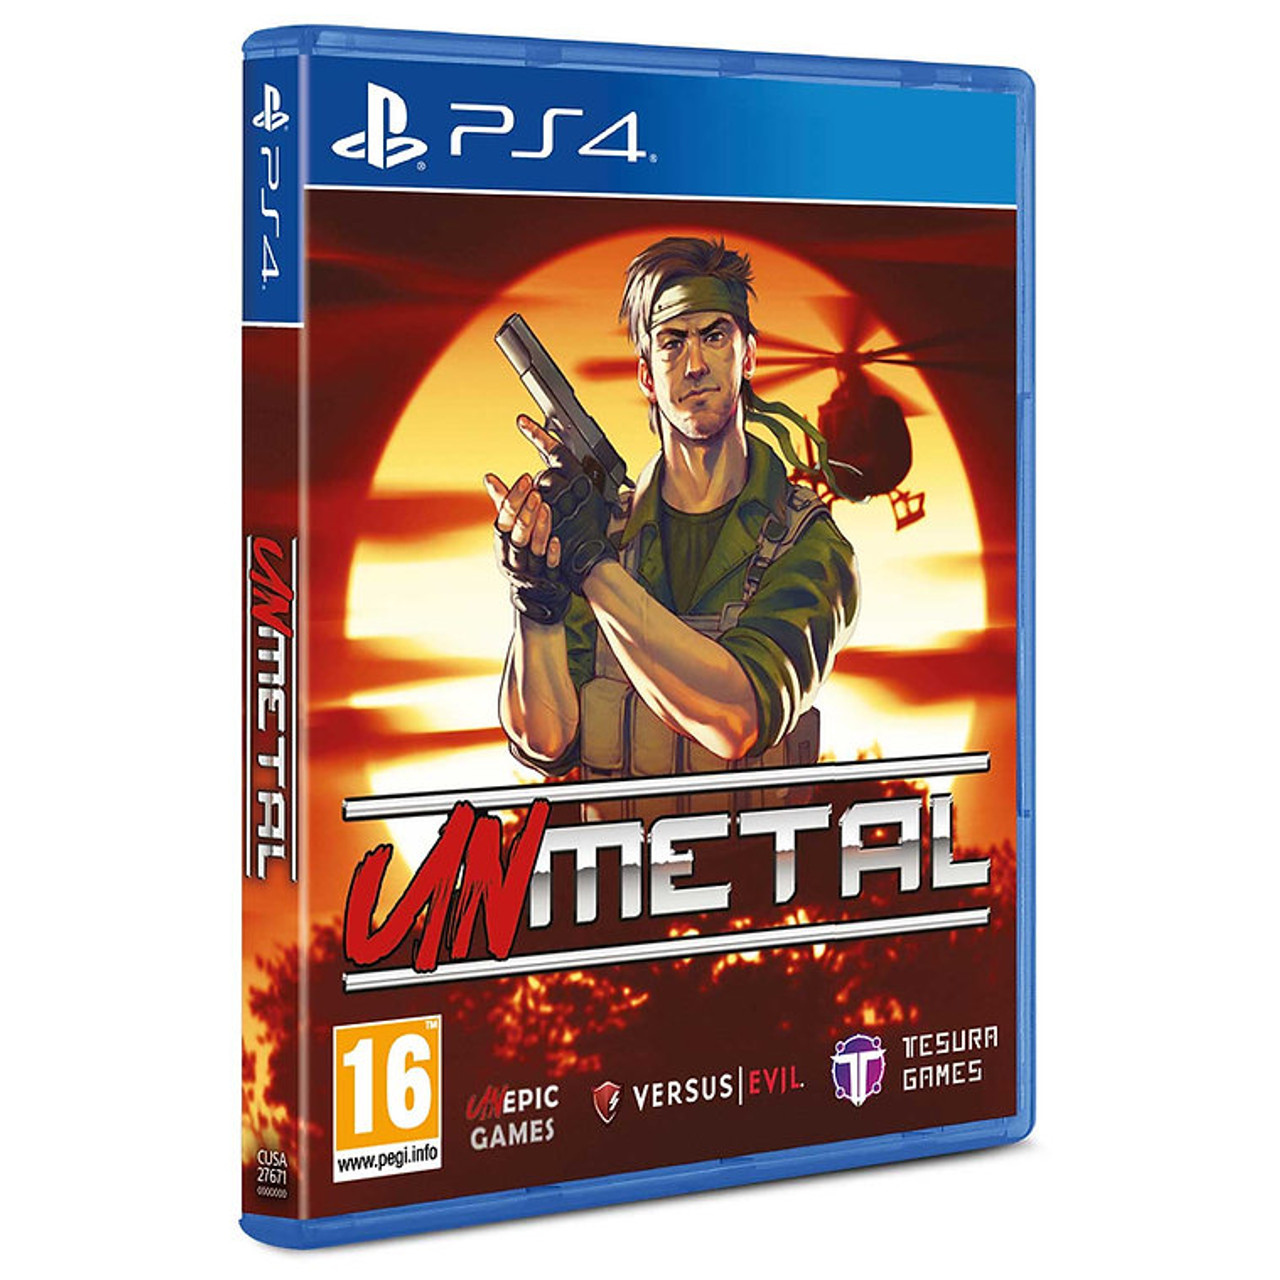 UnMetal for Playstation 4 available at videogamesnewyork, vgny